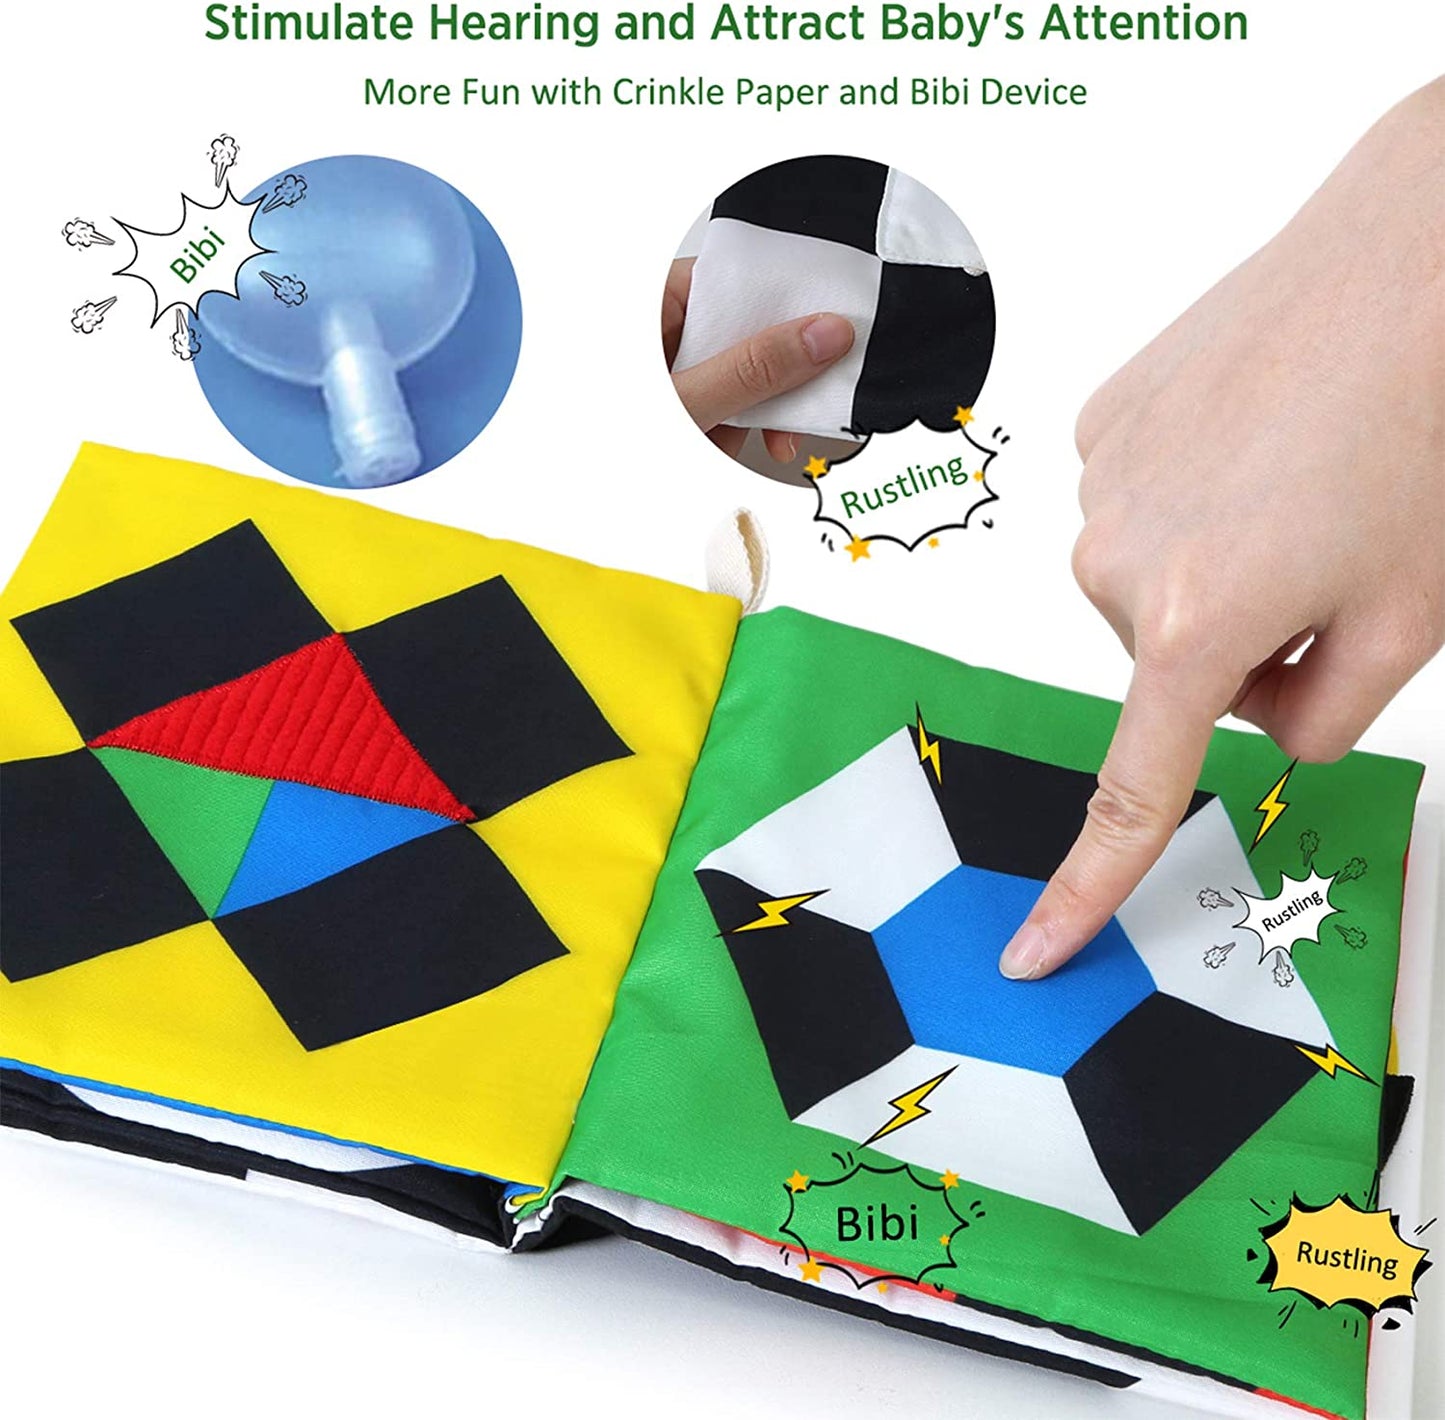 Baby Books Toys, High Contrast Black and White, Non Toxic Fabric Touch and Feel Crinkle Cloth ,Early Educational Stimulation Soft Gift for Infants Toddlers, Mirror